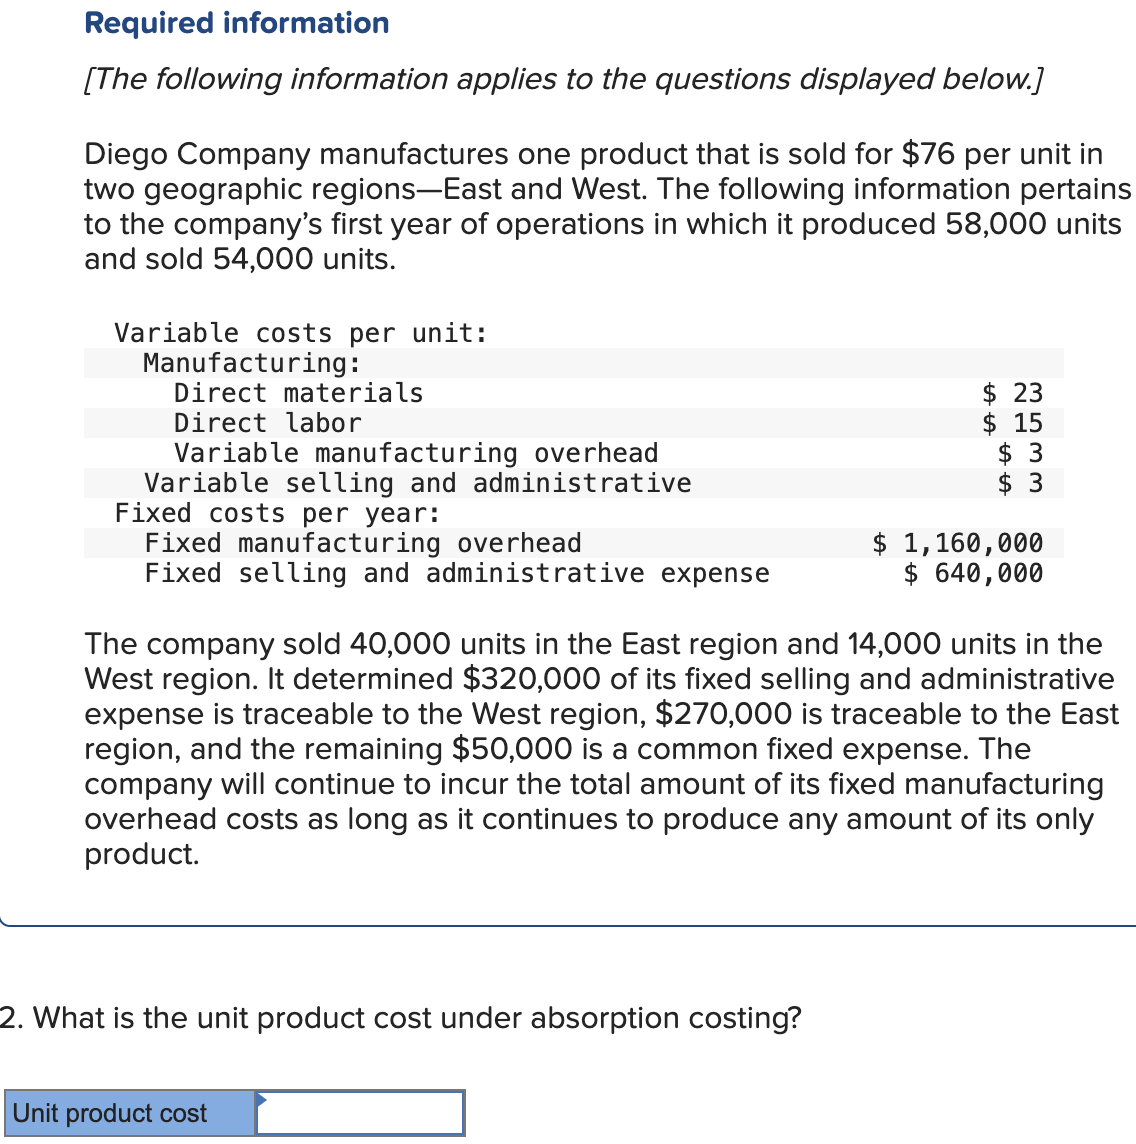 Required information
[The following information applies to the questions displayed below.]
Diego Company manufactures one product that is sold for $76 per unit in
two geographic regions-East and West. The following information pertains
to the company's first year of operations in which it produced 58,000 units
and sold 54,000 units.
Variable costs per unit:
Manufacturing:
Direct materials
Direct labor
Variable manufacturing overhead
Variable selling and administrative
Fixed costs per year:
Fixed manufacturing overhead
Fixed selling and administrative expense
2. What is the unit product cost under absorption costing?
$ 23
$15
$ 3
$ 3
The company sold 40,000 units in the East region and 14,000 units in the
West region. It determined $320,000 of its fixed selling and administrative
expense is traceable to the West region, $270,000 is traceable to the East
region, and the remaining $50,000 is a common fixed expense. The
company will continue to incur the total amount of its fixed manufacturing
overhead costs as long as it continues to produce any amount of its only
product.
Unit product cost
$ 1,160,000
$ 640,000